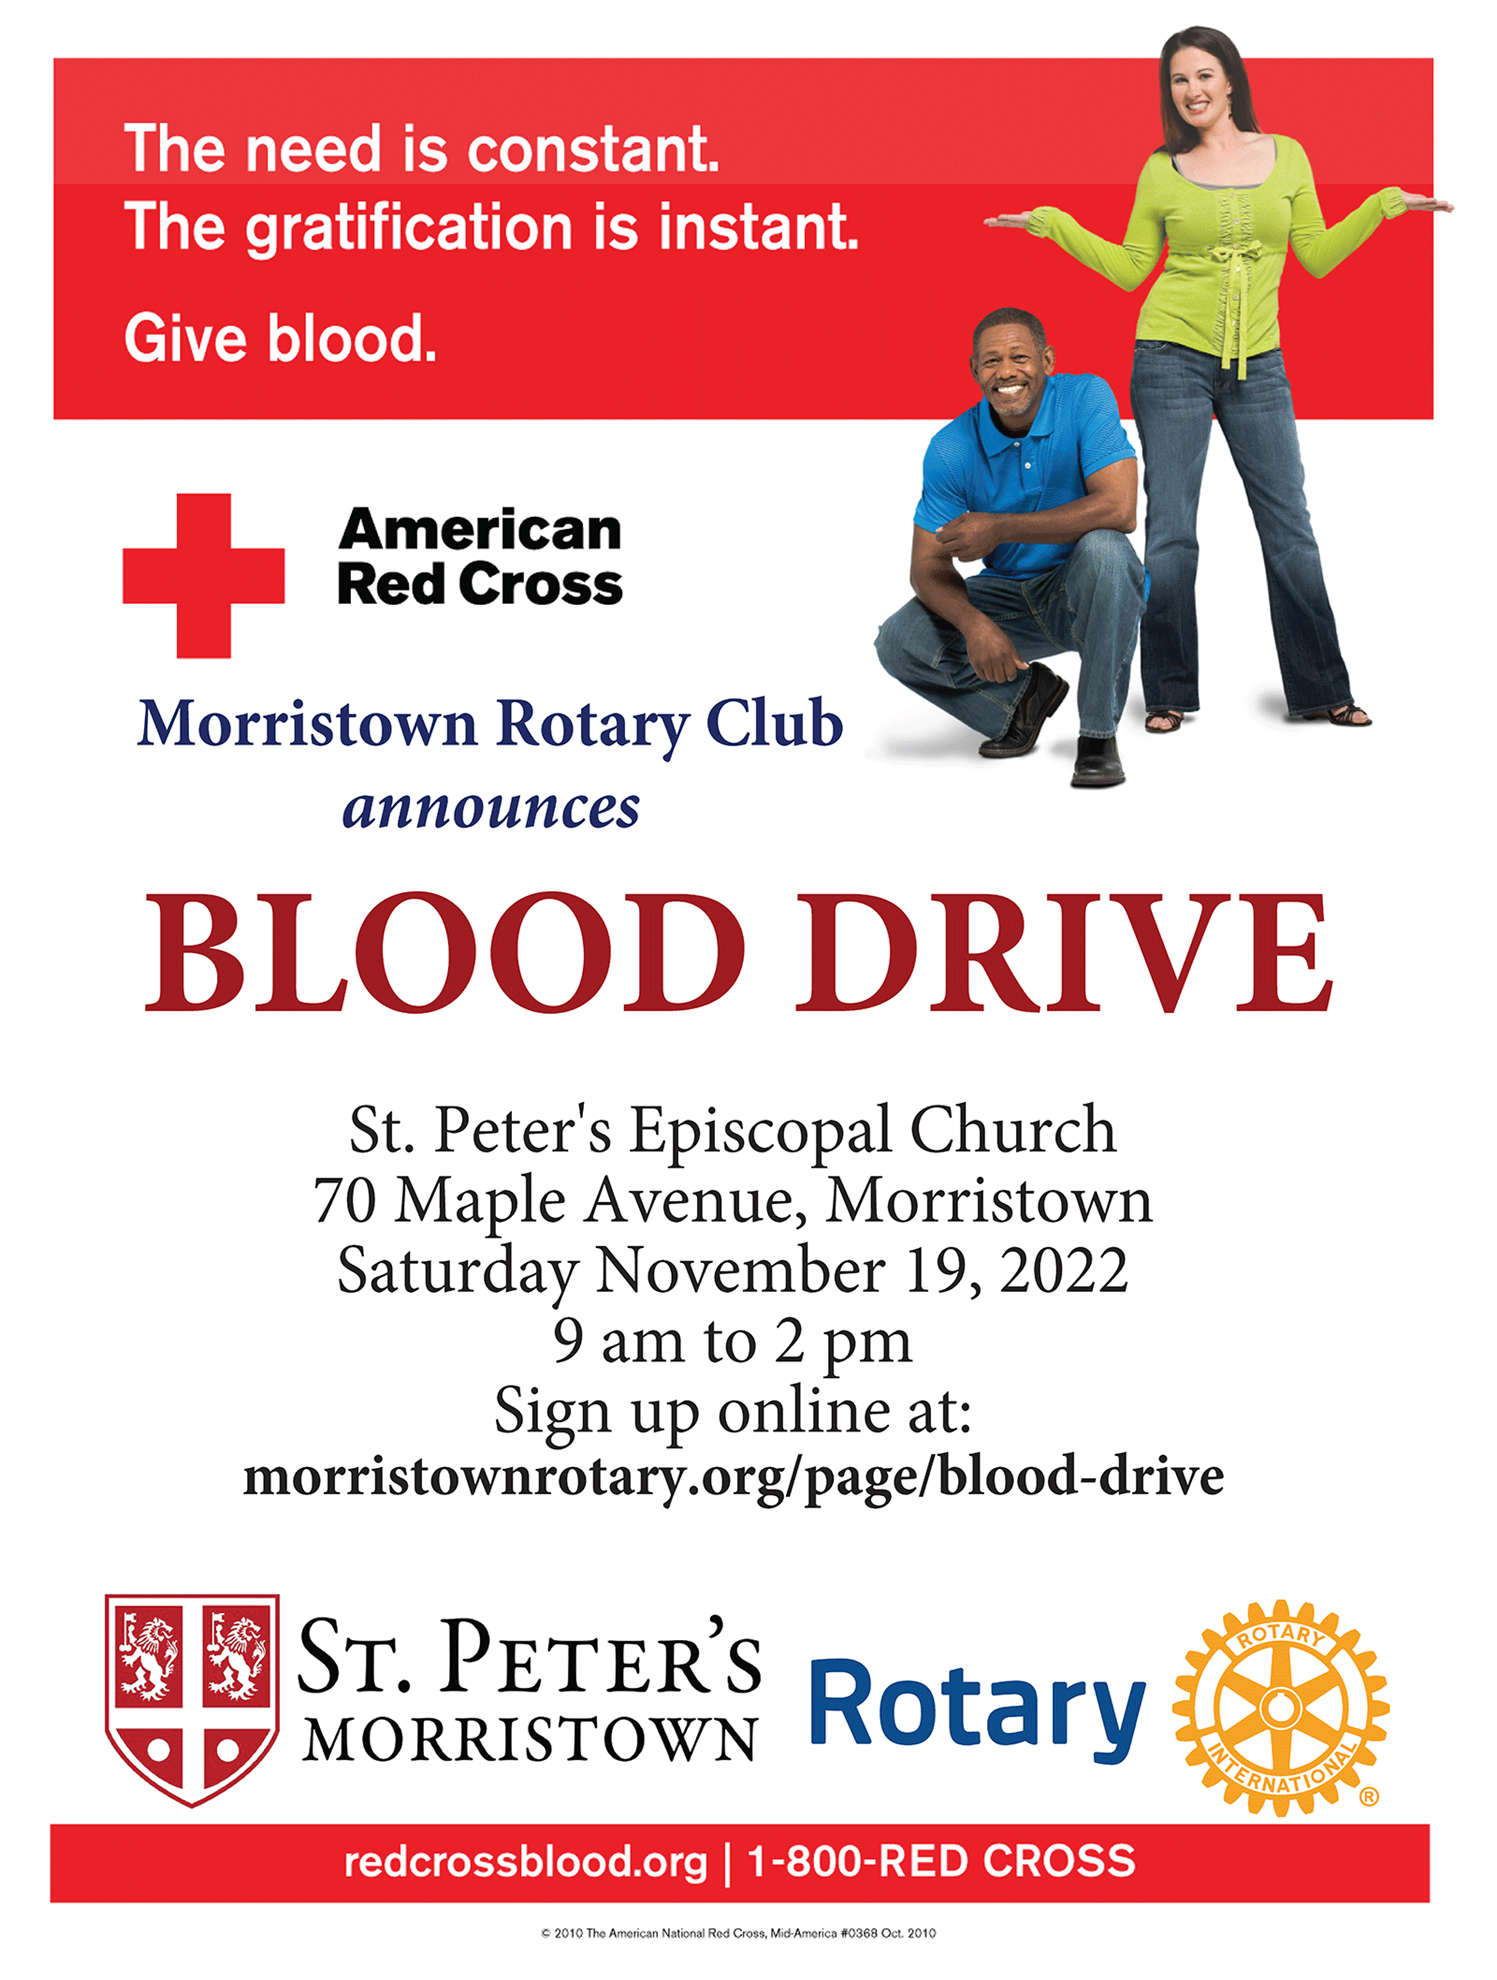 The need is constant. The gratification is instant. Give blood on November 19, 2022 at St. Peter's Episcopal Church Morristown, located at 70 Maple Street. Appointments recommended, sign up by clicking on this flyer.